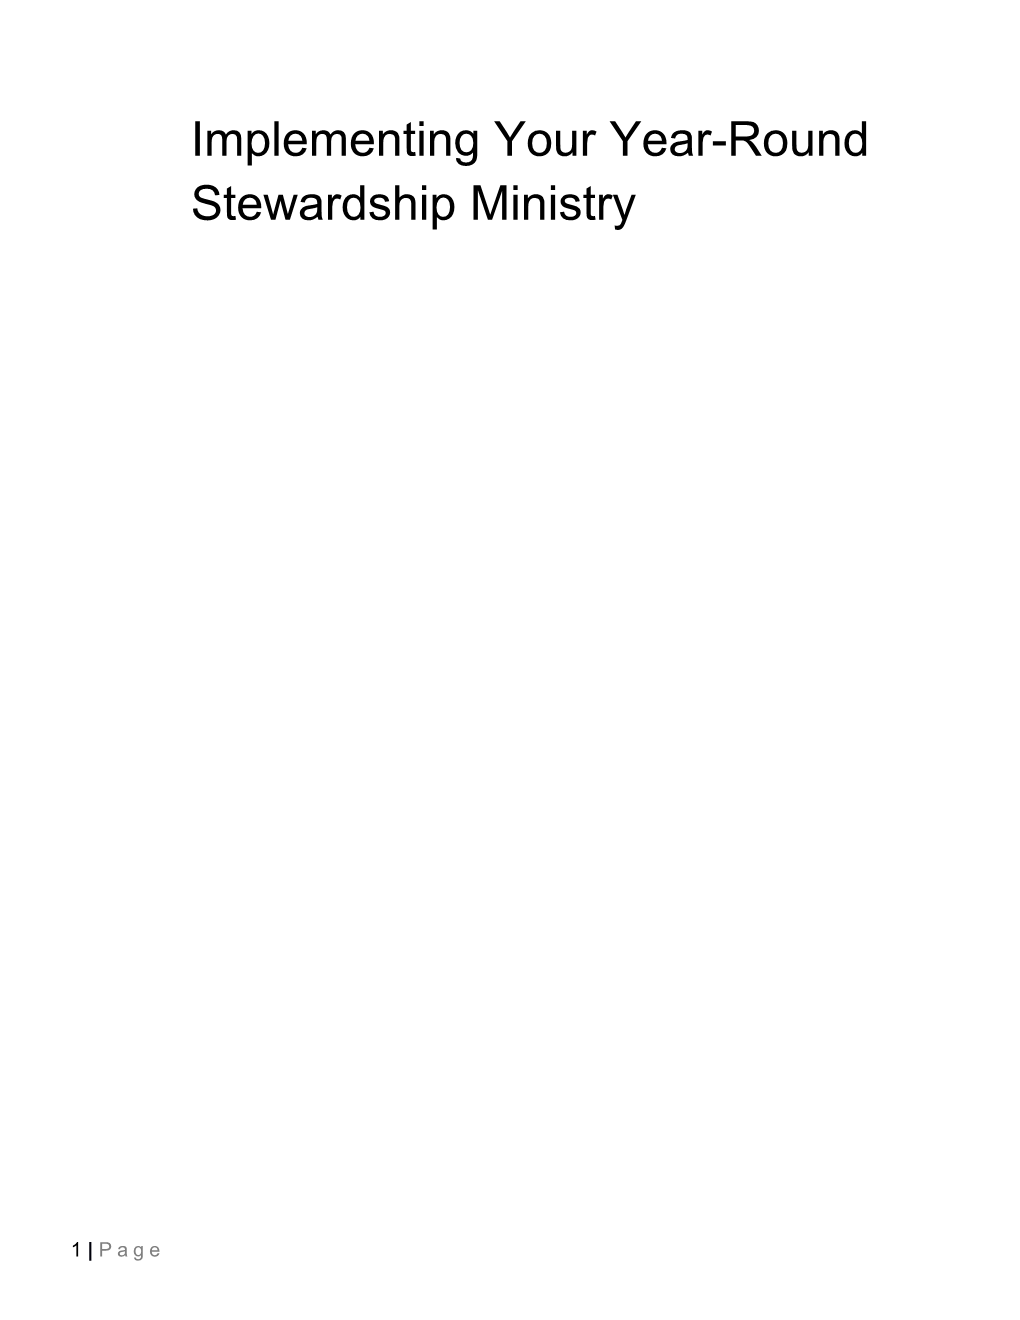 Implementing Your Year-Round Stewardship Ministry